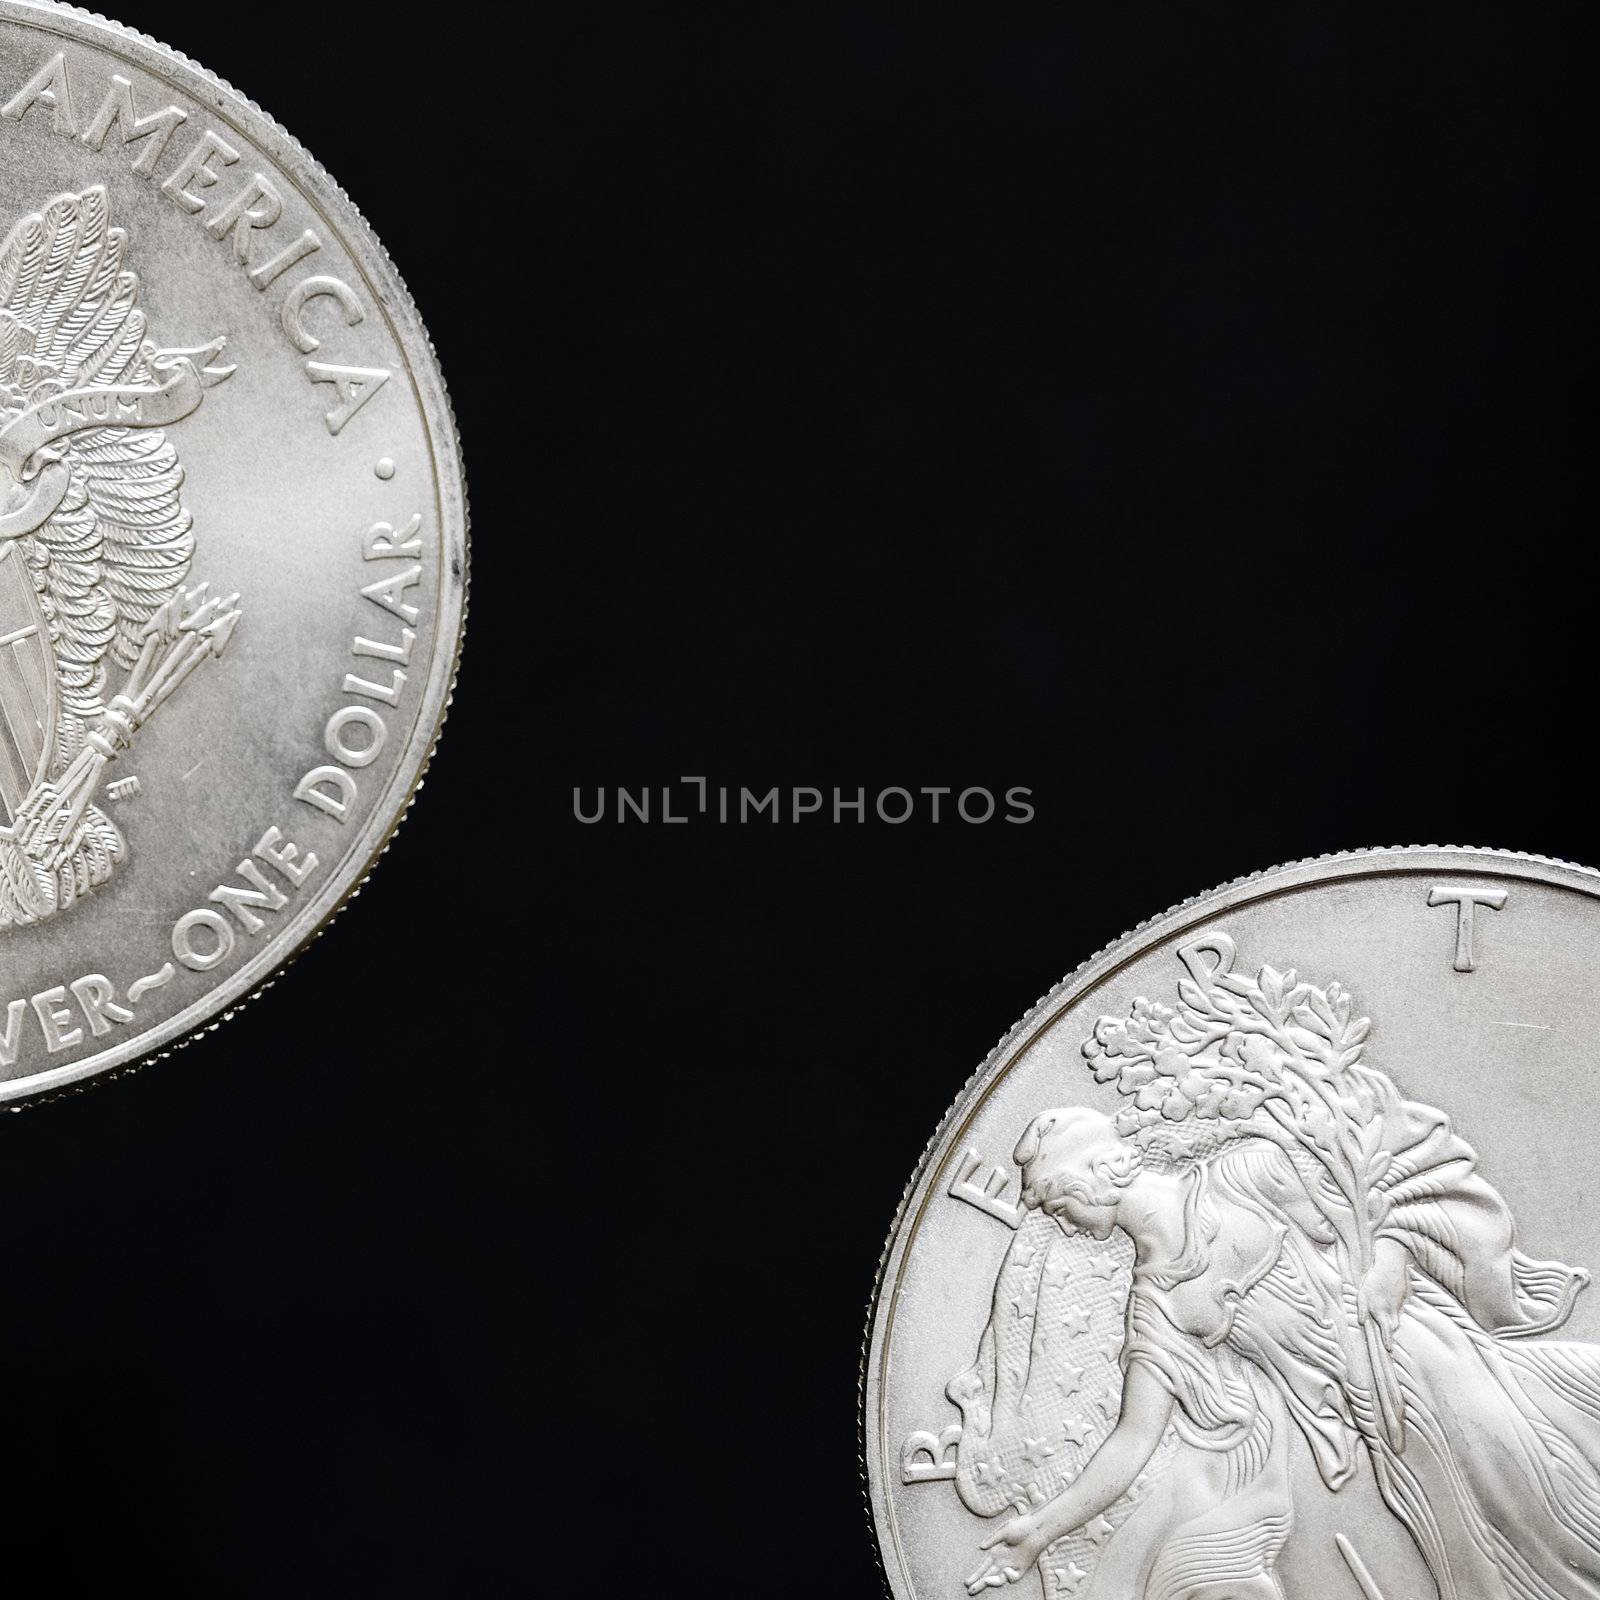 Two silver shiny dollar coins isolated on black background